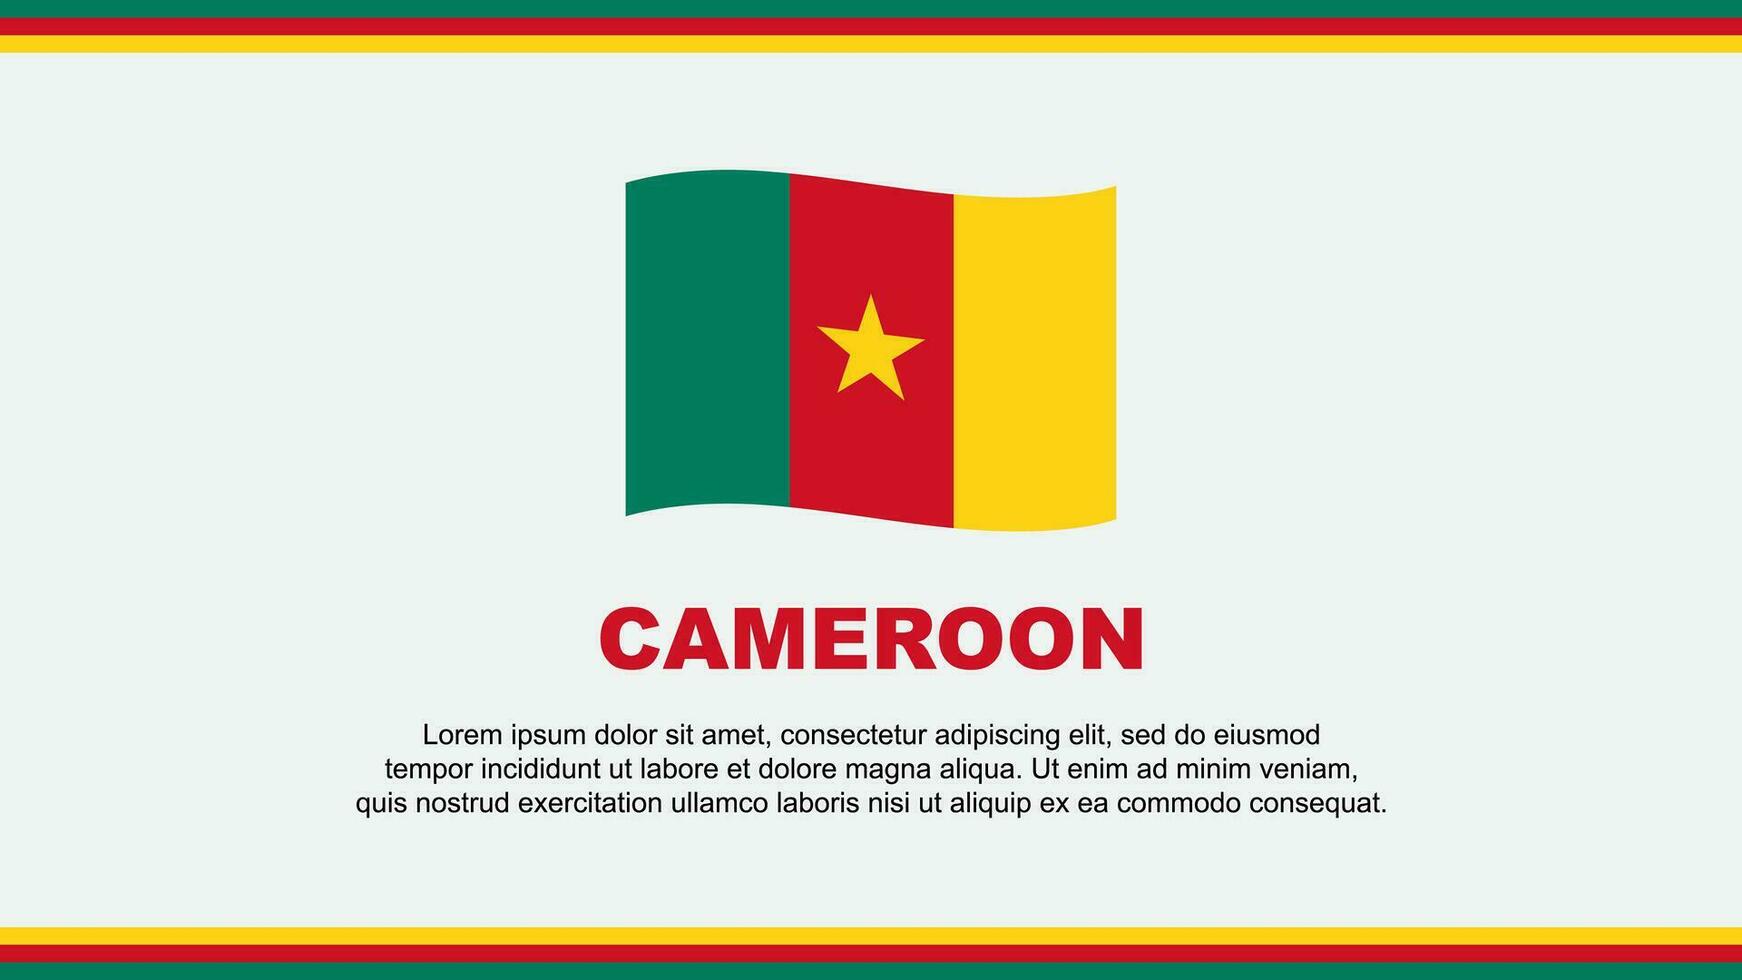 Cameroon Flag Abstract Background Design Template. Cameroon Independence Day Banner Social Media Vector Illustration. Cameroon Design